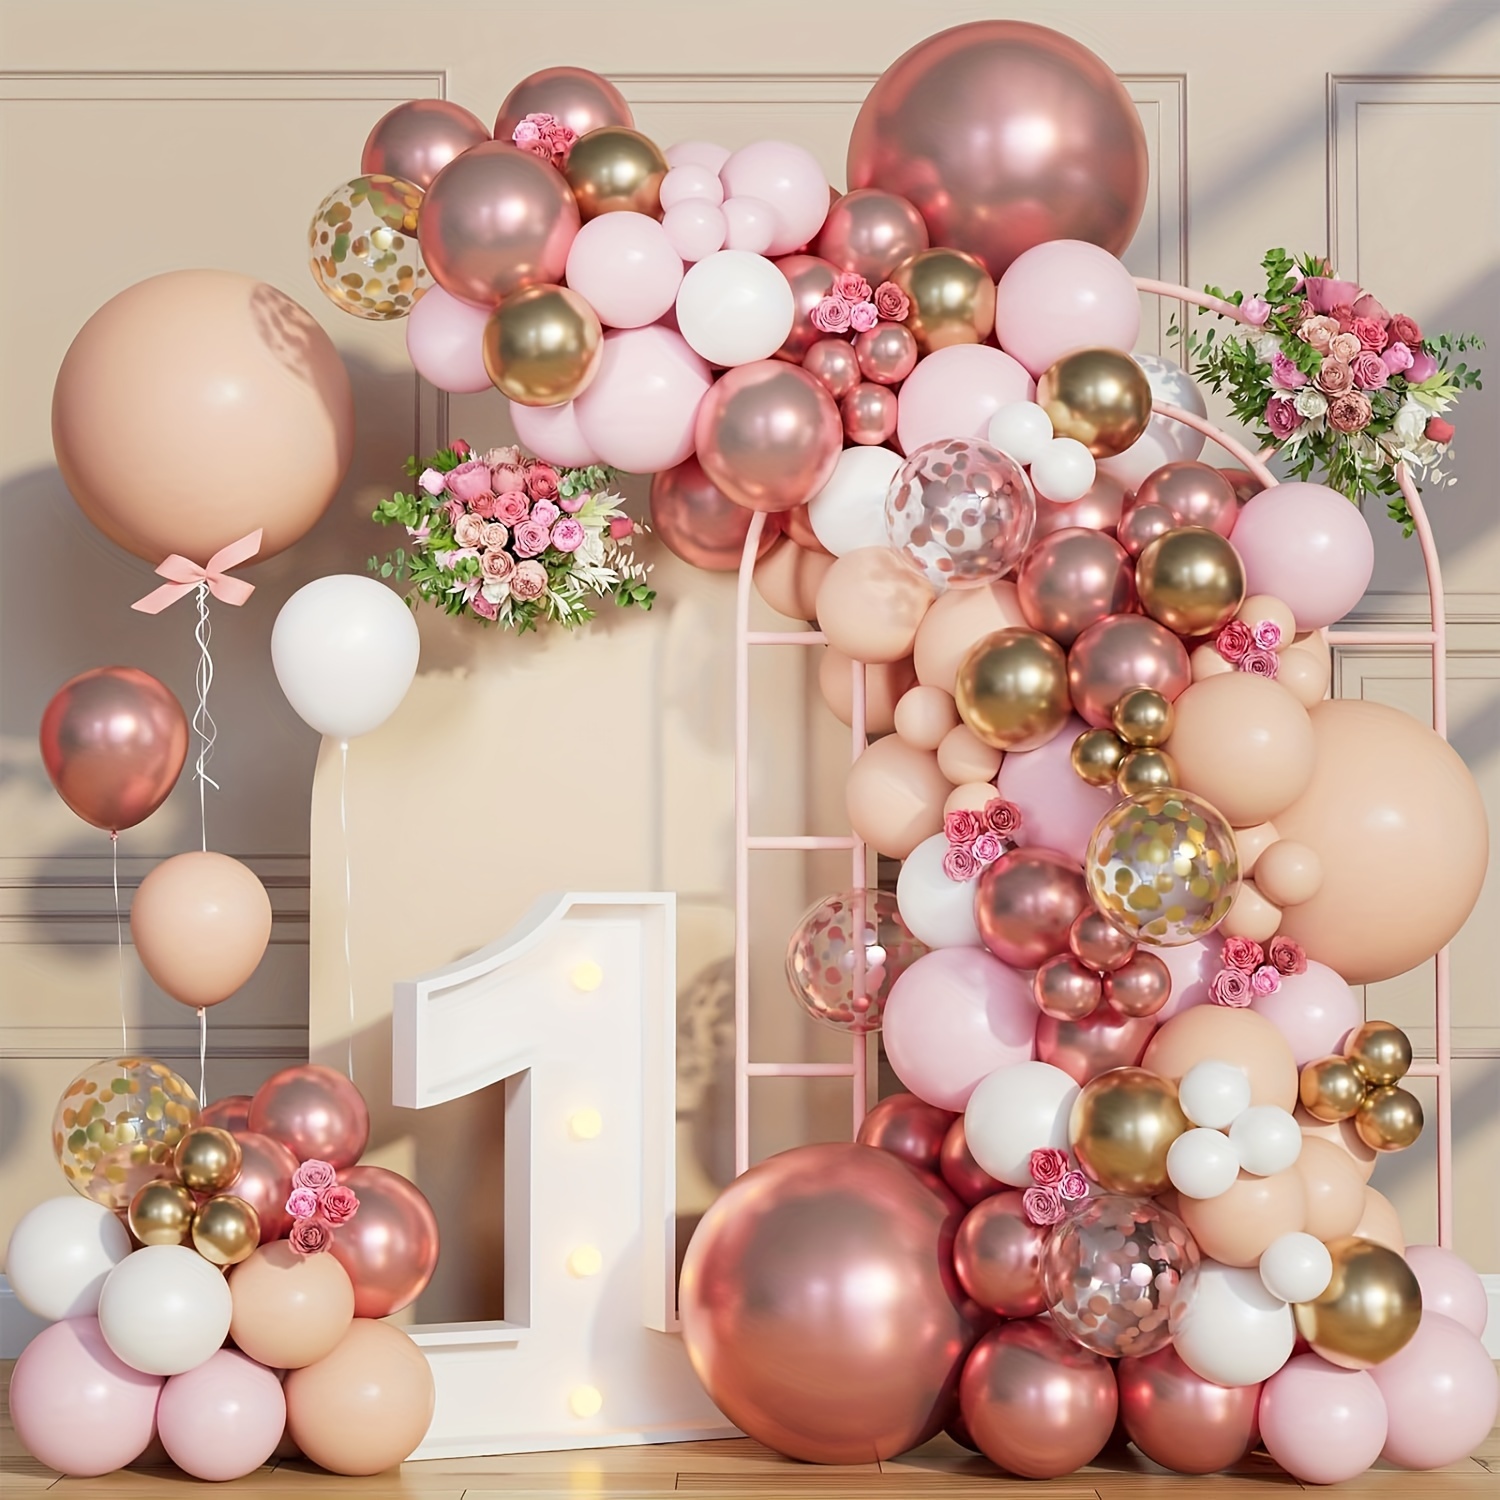 

110-piece Rose Balloon Garland Arch Kit - Ideal For Weddings, Anniversaries, Valentine's Day & More - Features Nude, Pastel Pink, Metallic Shine, Matte White & Multicolor Balloons.